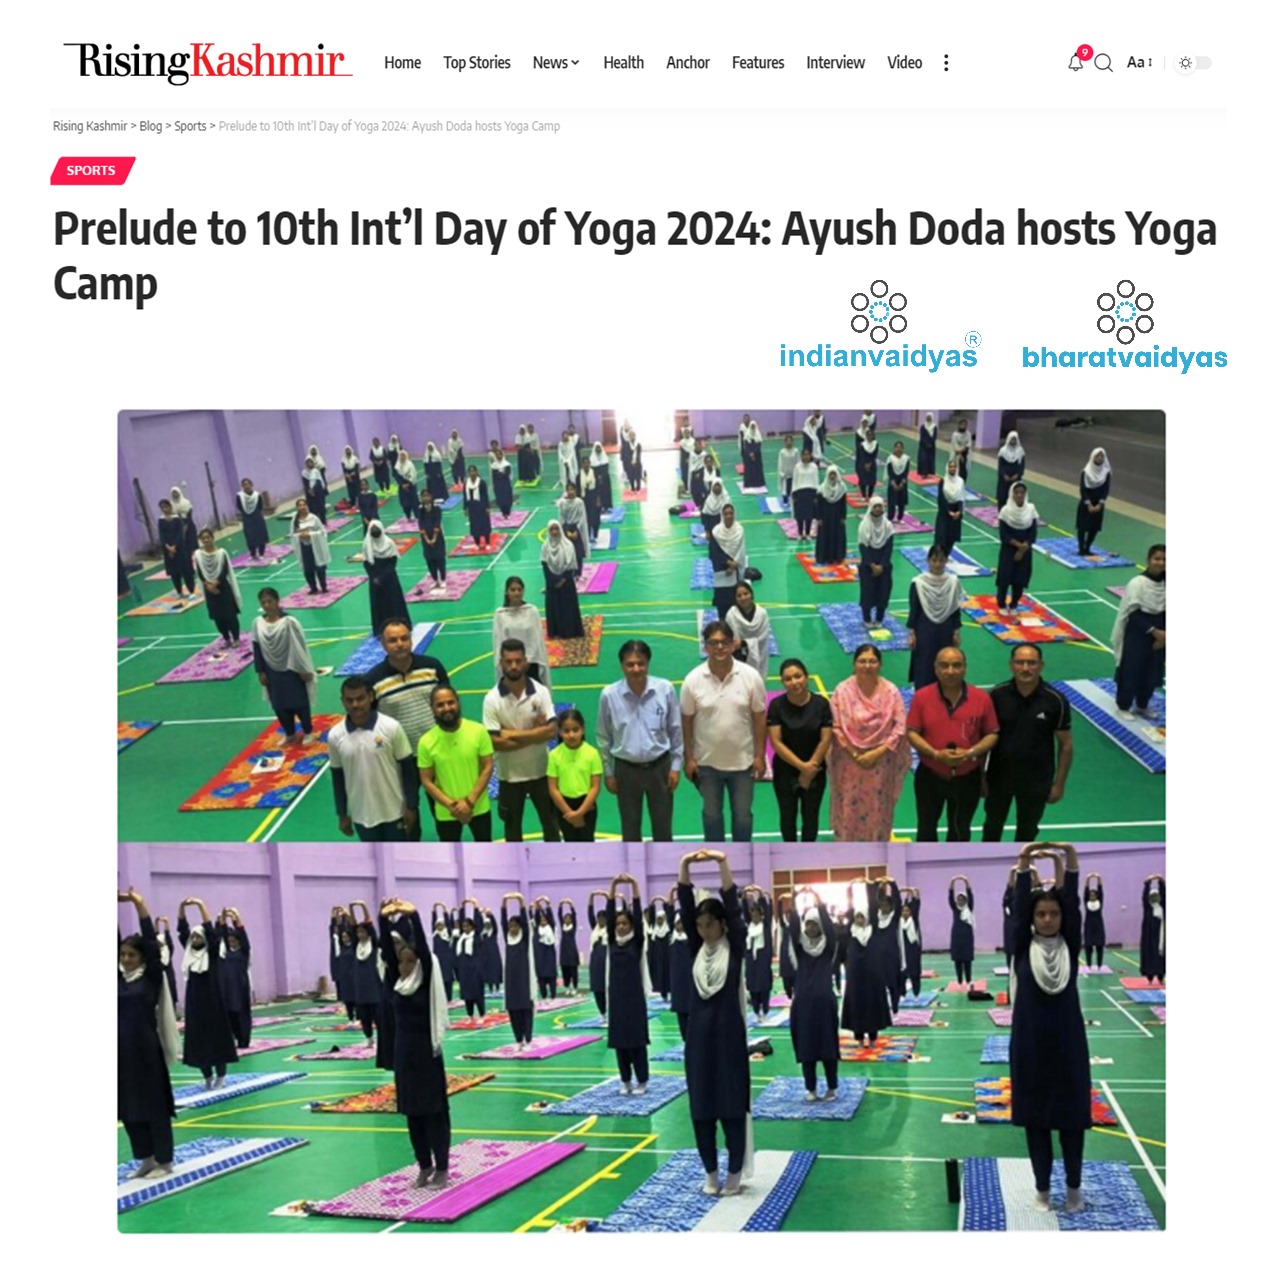 Prelude to 10th Int’l Day of Yoga 2024: Ayush Doda hosts Yoga Camp